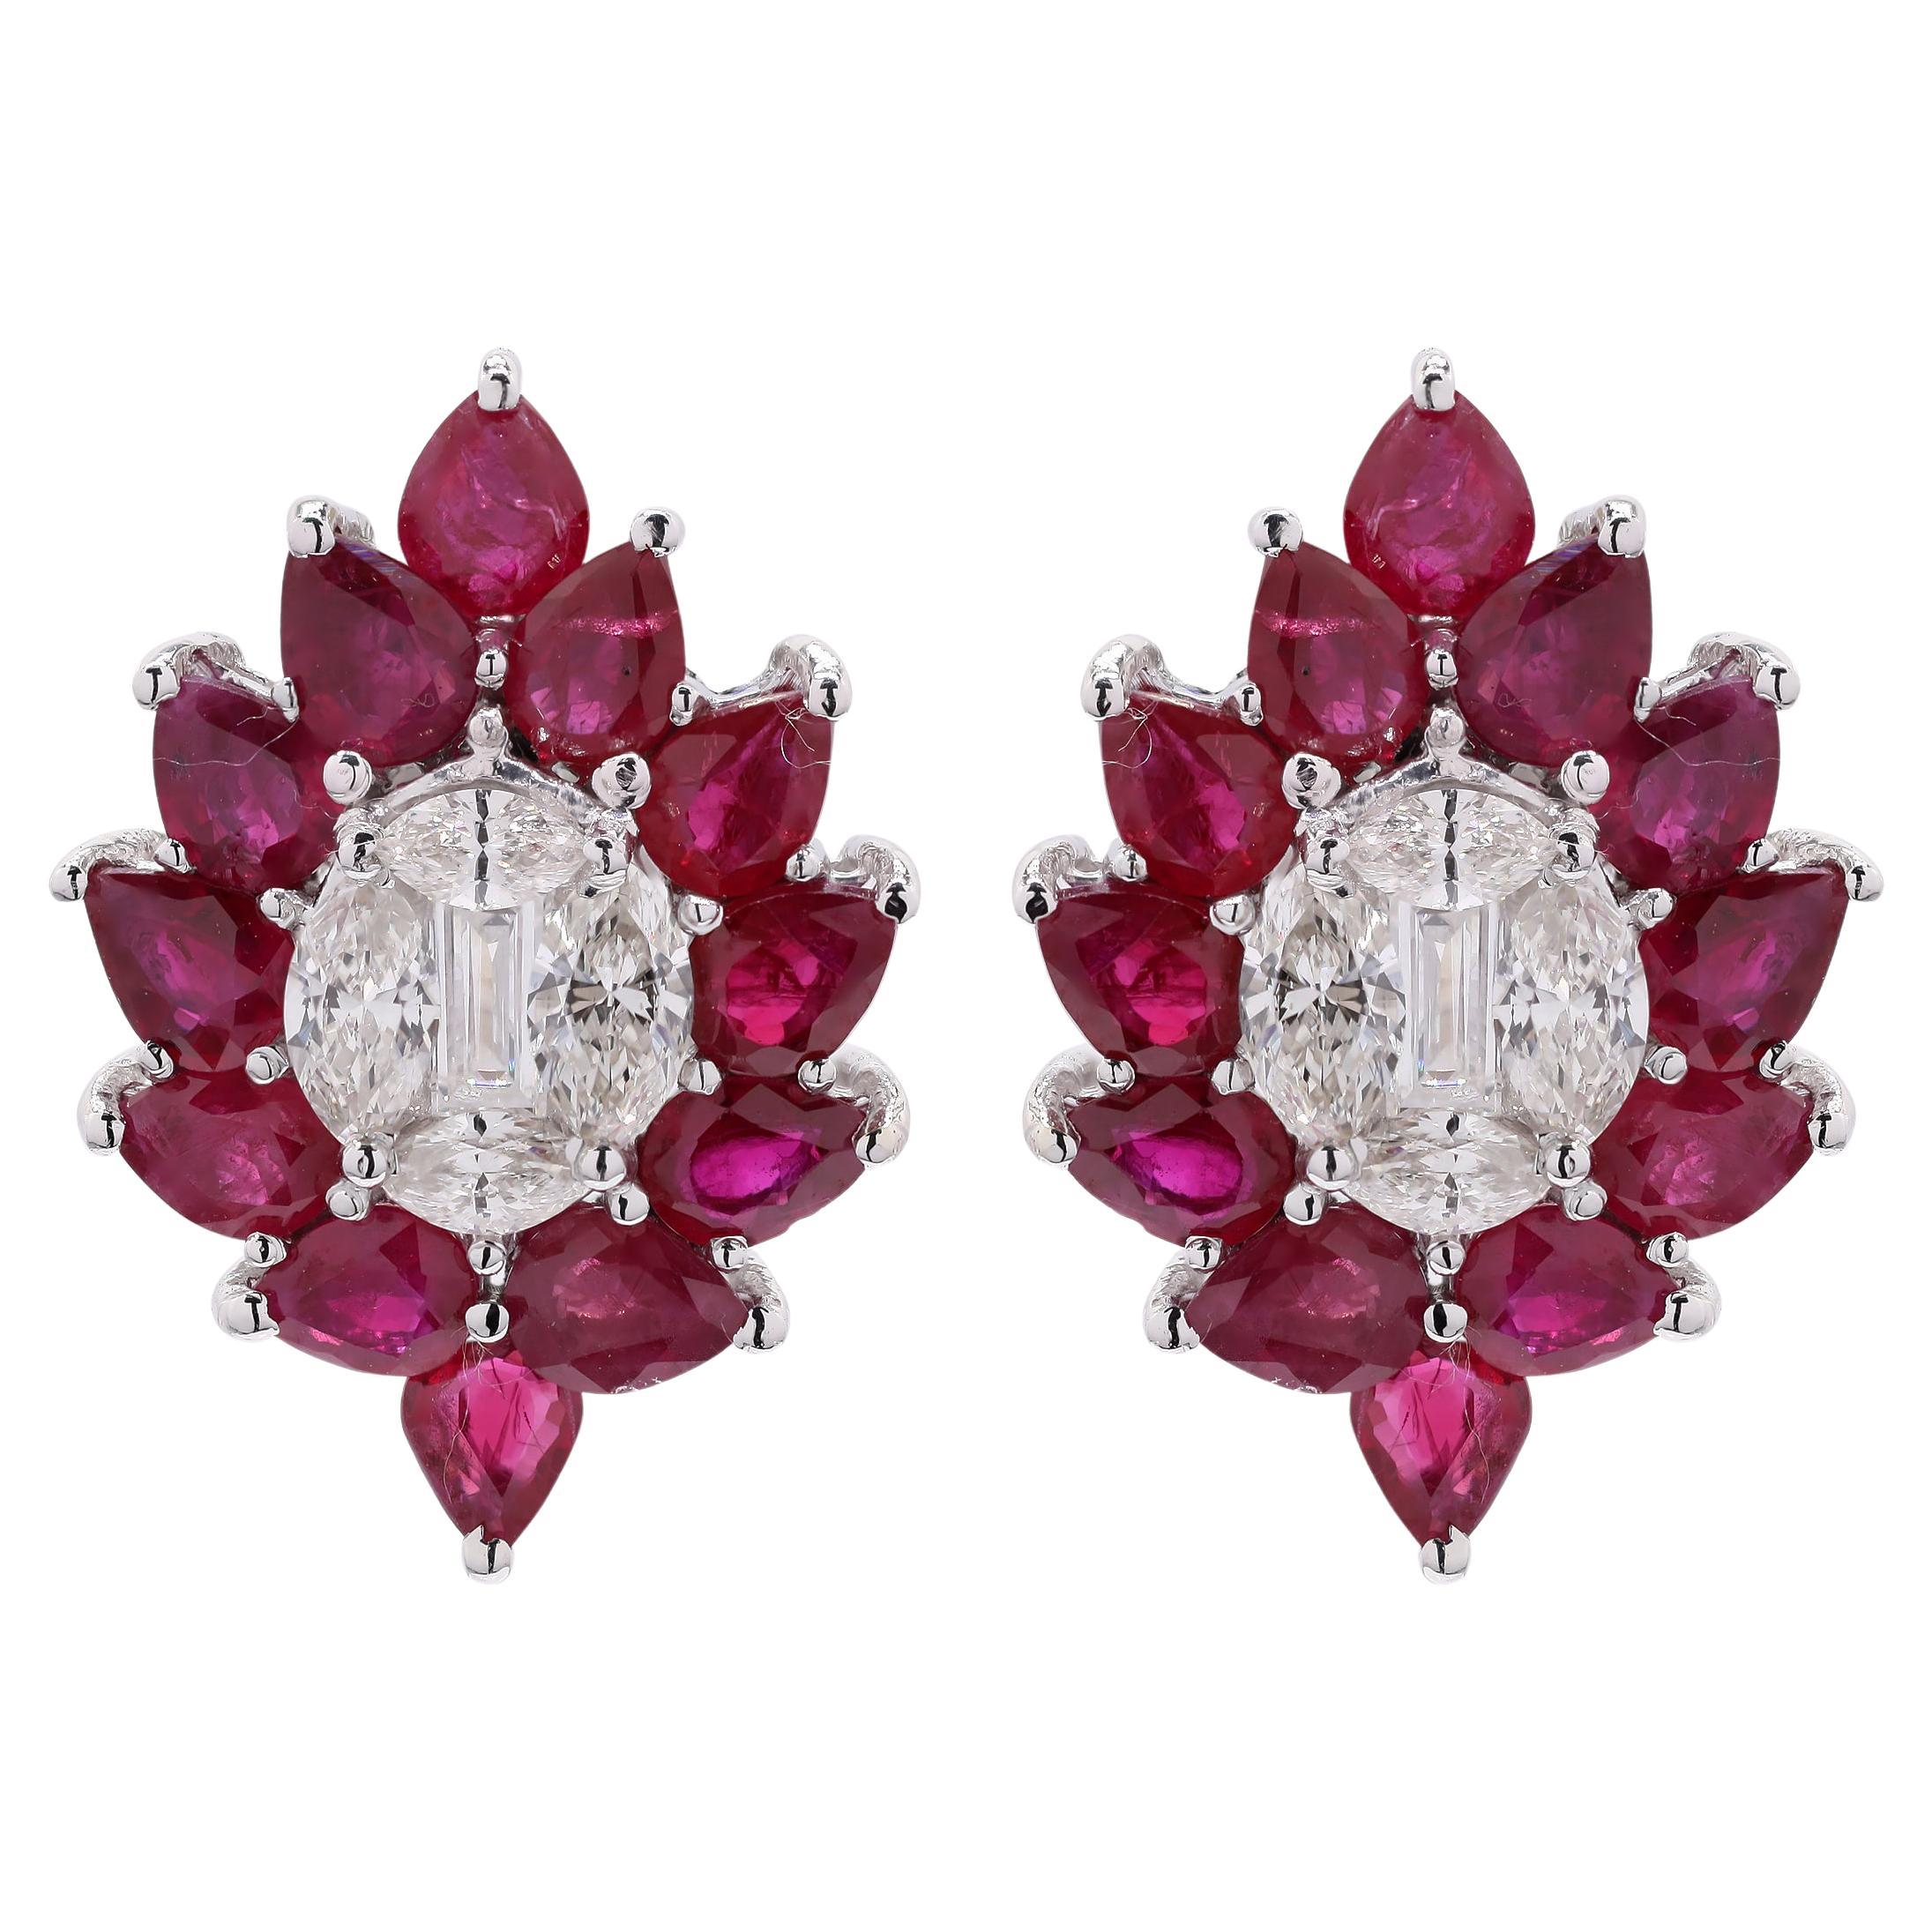 18k White Gold Magnificent Ruby and Diamond Statement Studs